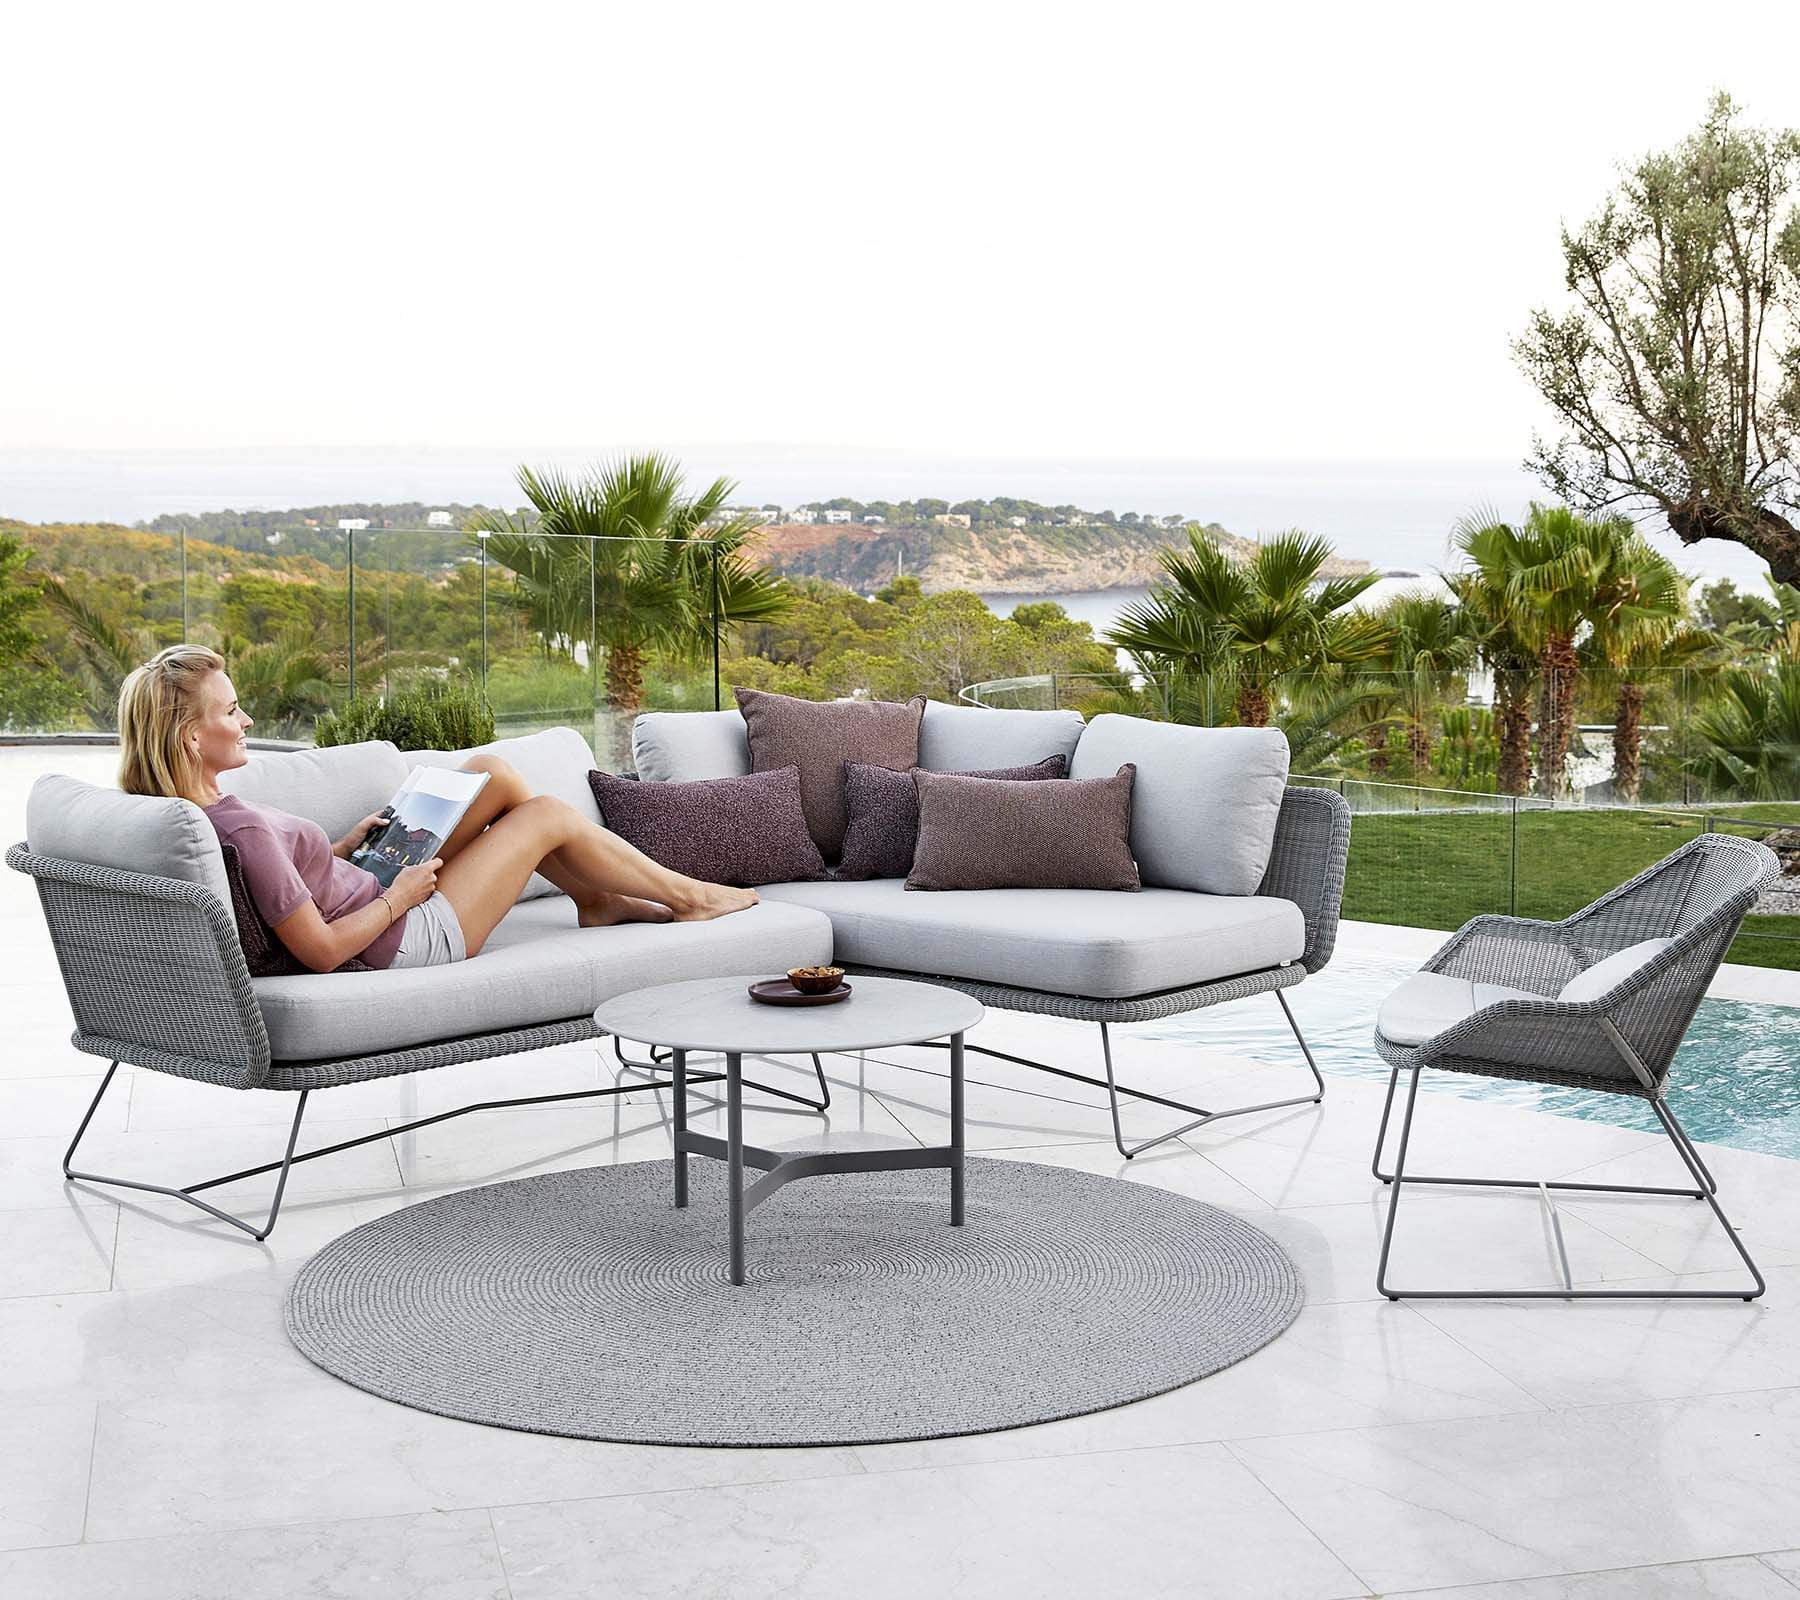 Boxhill's Circle Outdoor Rug Grey lifestyle image with 2 seater sofa and chaise lounge with a woman sitting down beside the pool